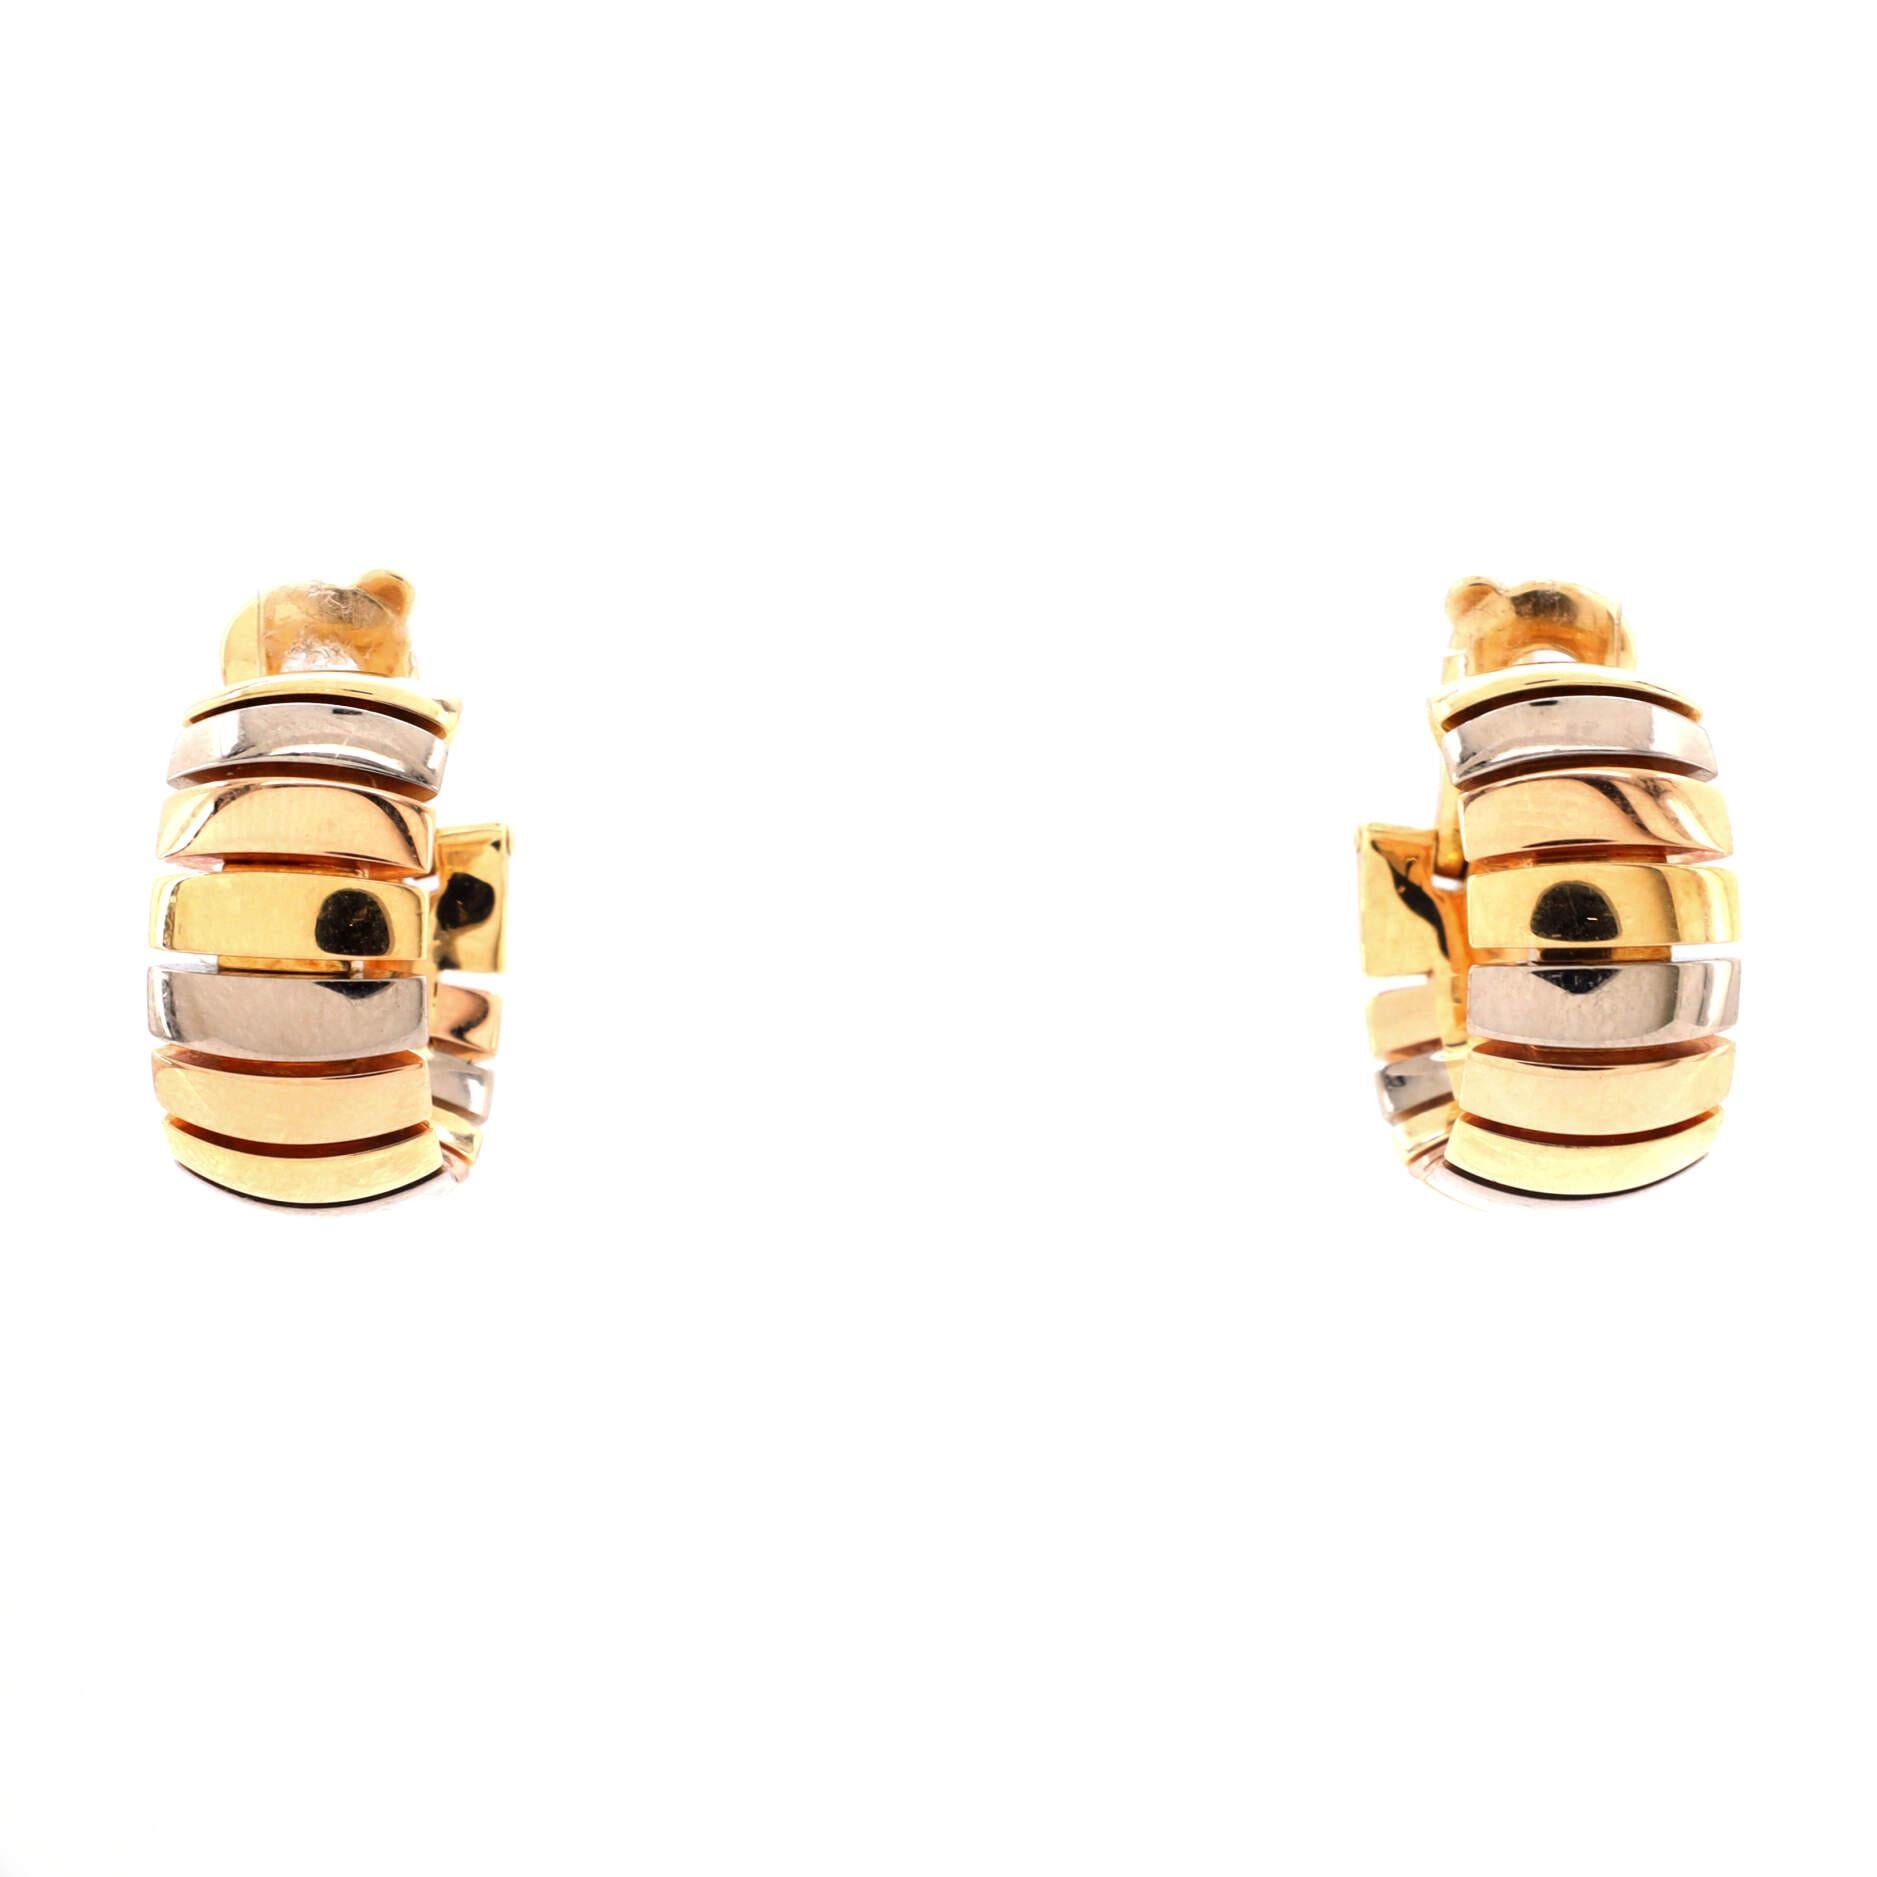 Condition: Great. Minor wear throughout.
Accessories: No Accessories
Measurements: Height/Length: 21.05 mm, Width: 10.00 mm
Designer: Cartier
Model: Tubogas Hoop Earrings 18K Tricolor Gold
Exterior Color: Tricolor Gold
Item Number: 191369/9